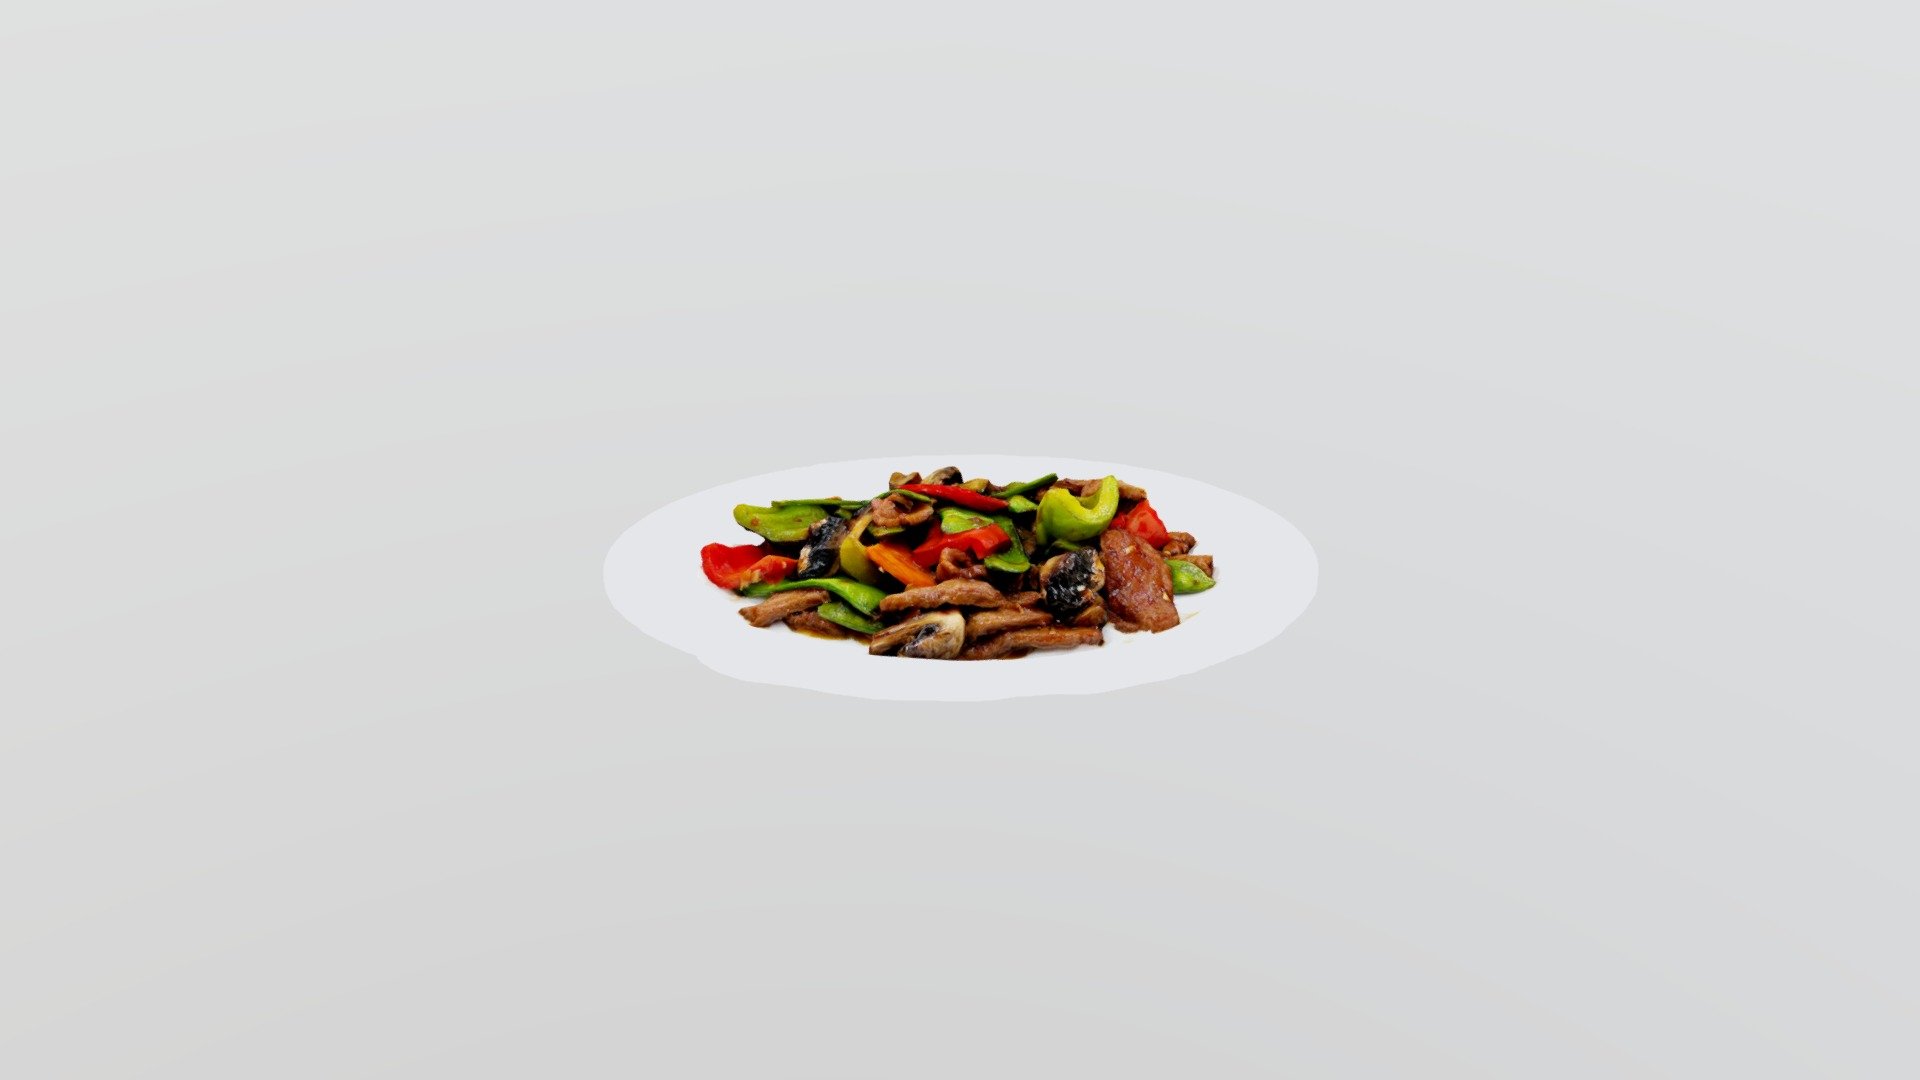 Emma's Hunan Beef - 3D model by Augmented Reality Marketing Solutions LLC (@AugRealMarketing) 3d model